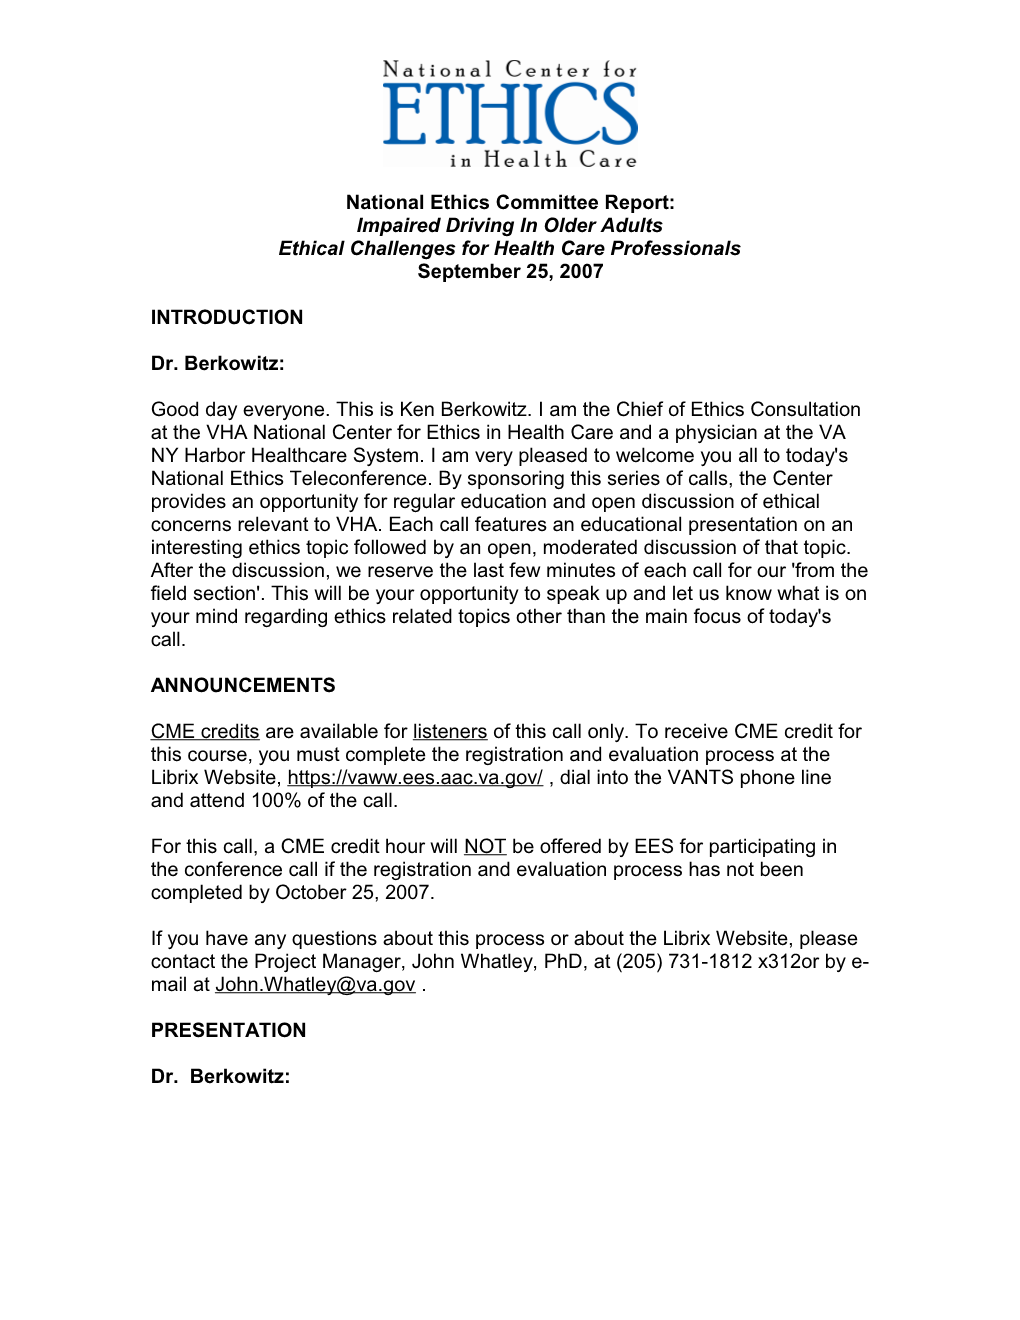 National Ethics Teleconference 9/25/07 - NEC Report - Impaired Driving in Older Adults